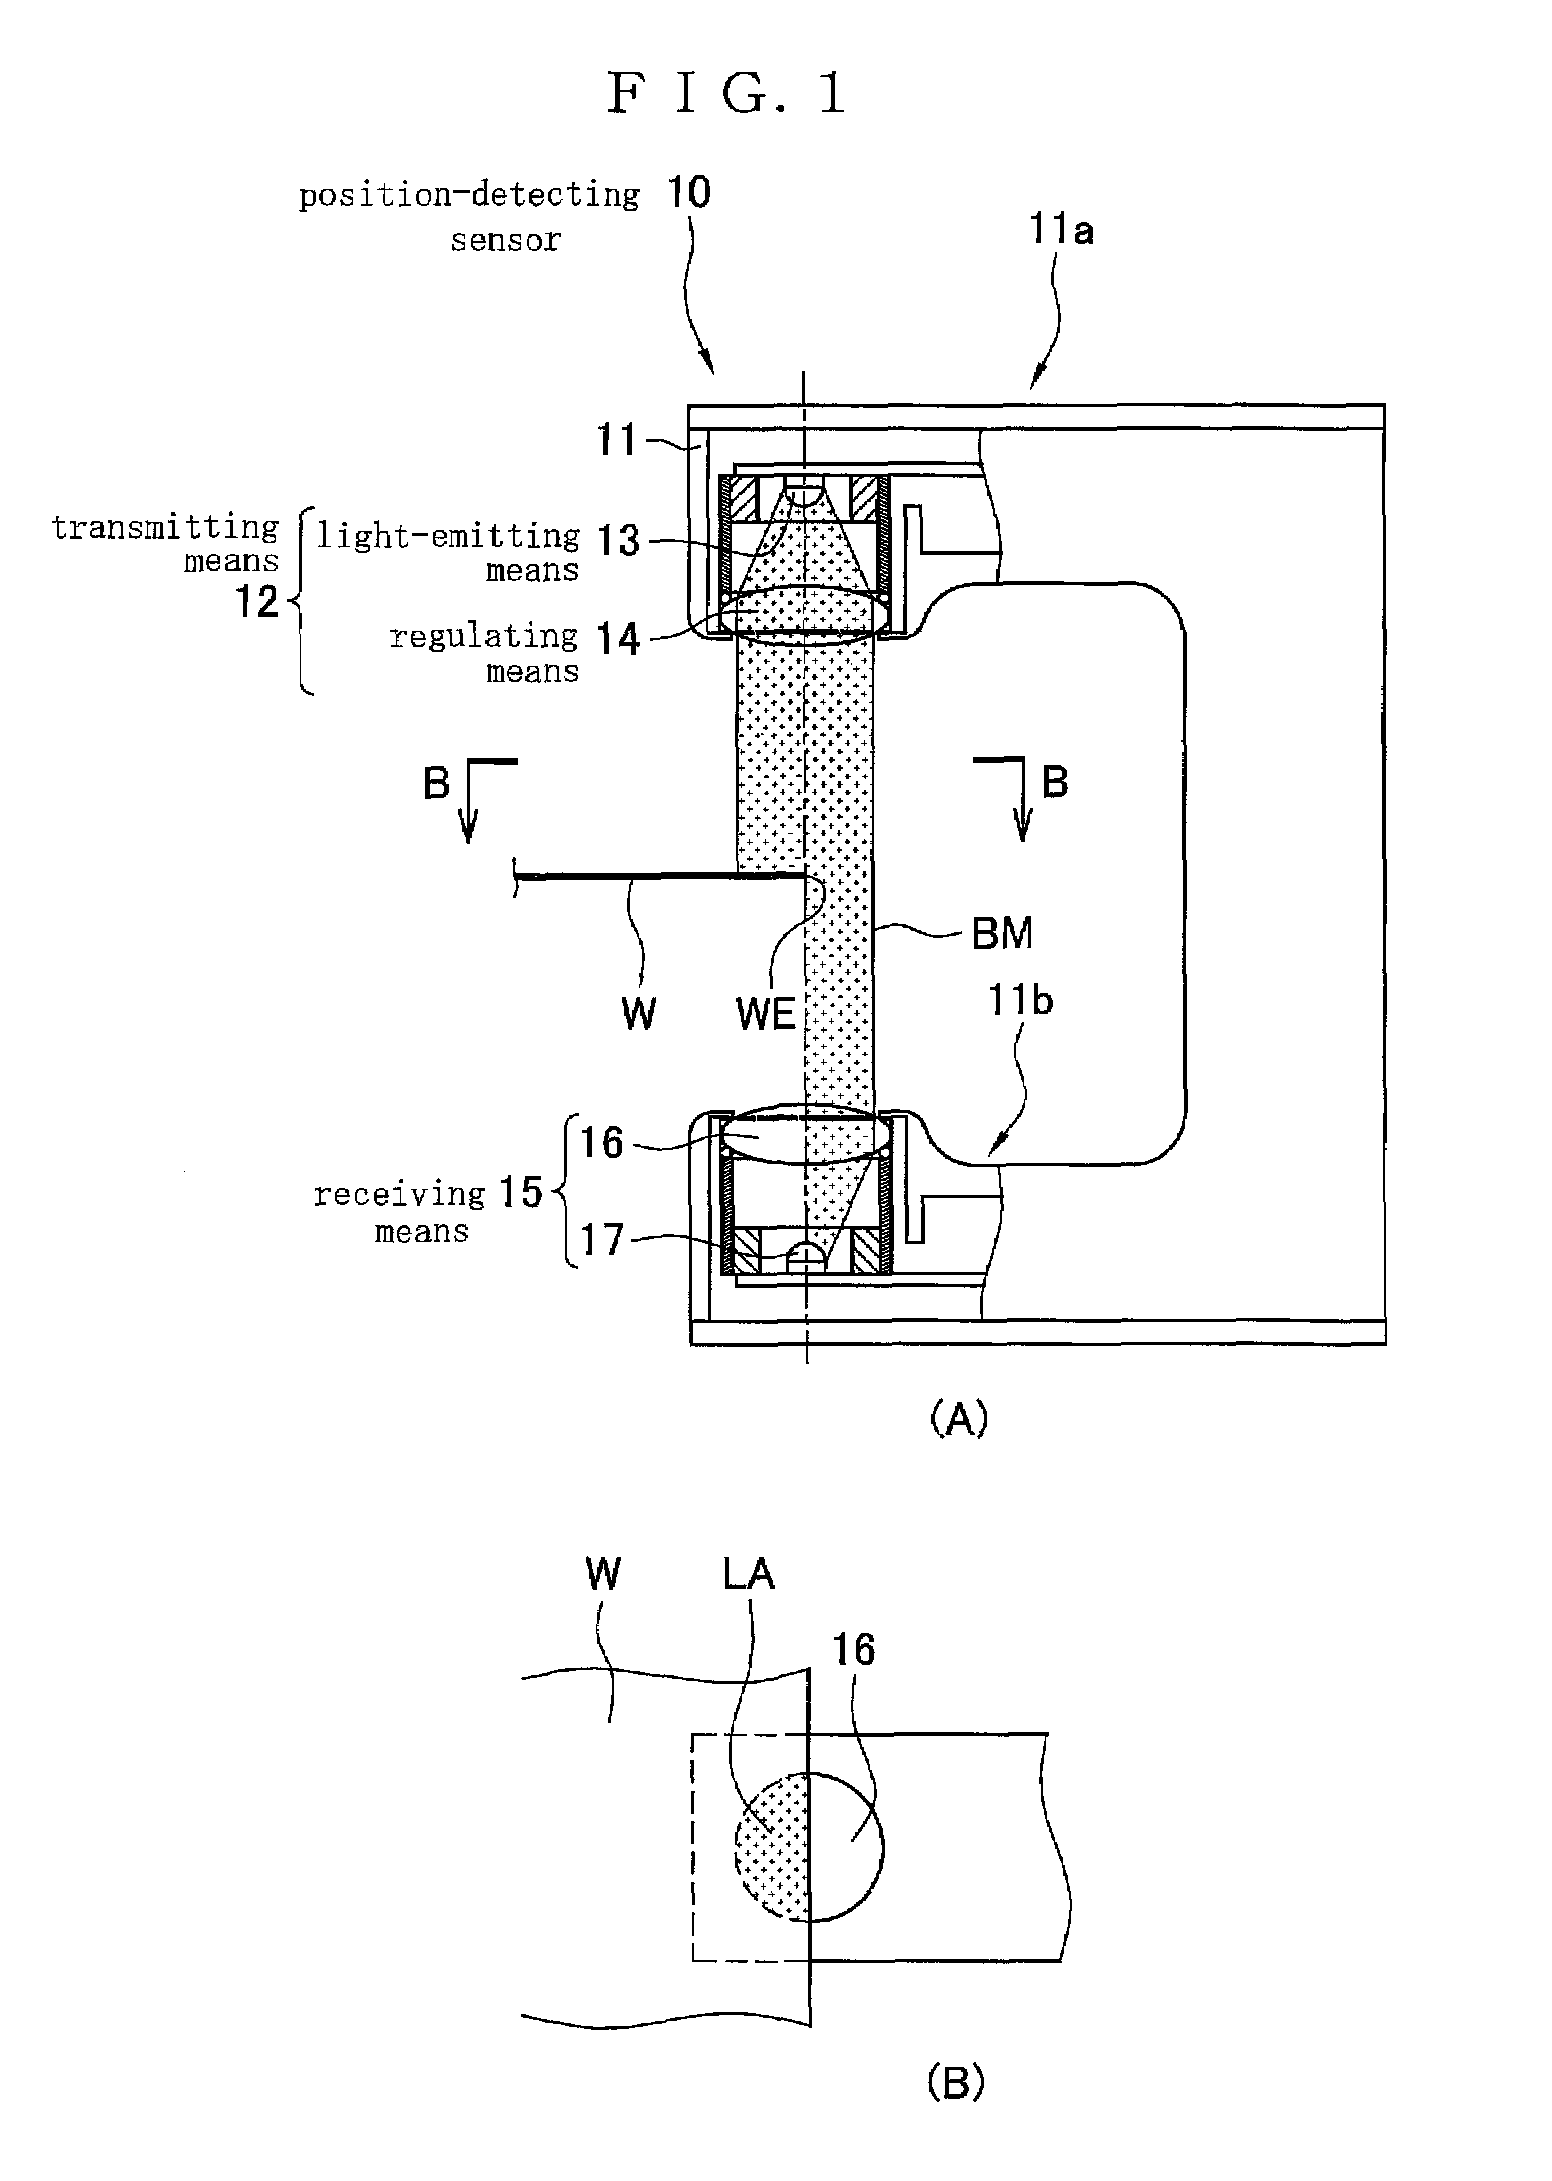 Position-detecting mechanism and position-detecting sensor